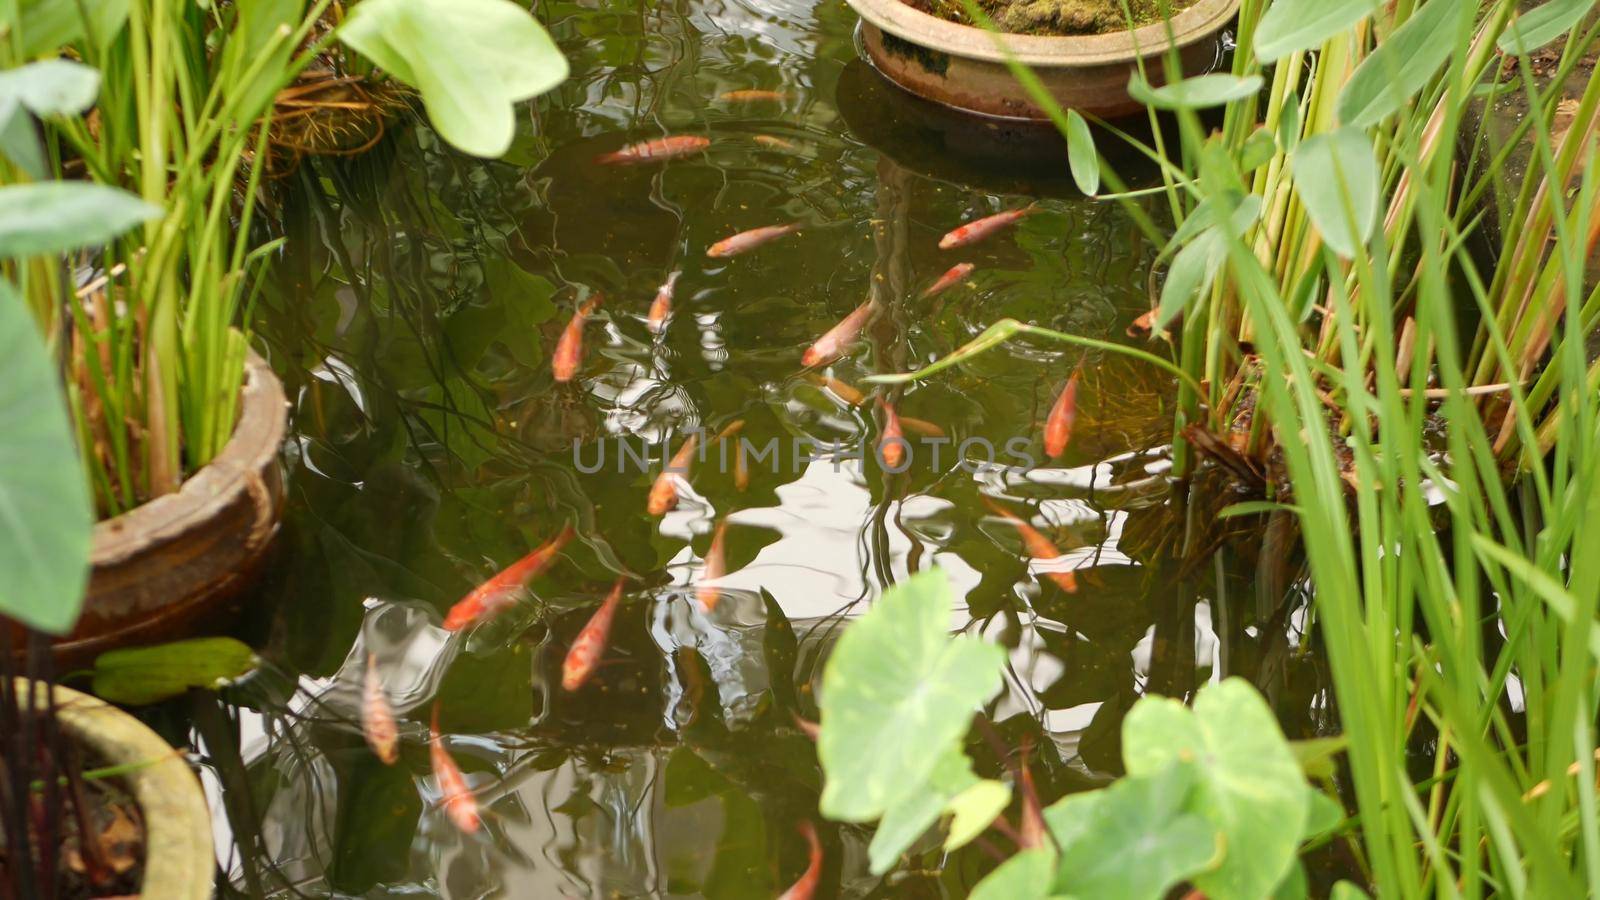 Natural greenery background. Vibrant Colorful Japanese Koi Carp fish swimming in traditional garden lake or pond. Chinese Fancy Carps under water surface. Oriental symbols of fortune and good luck